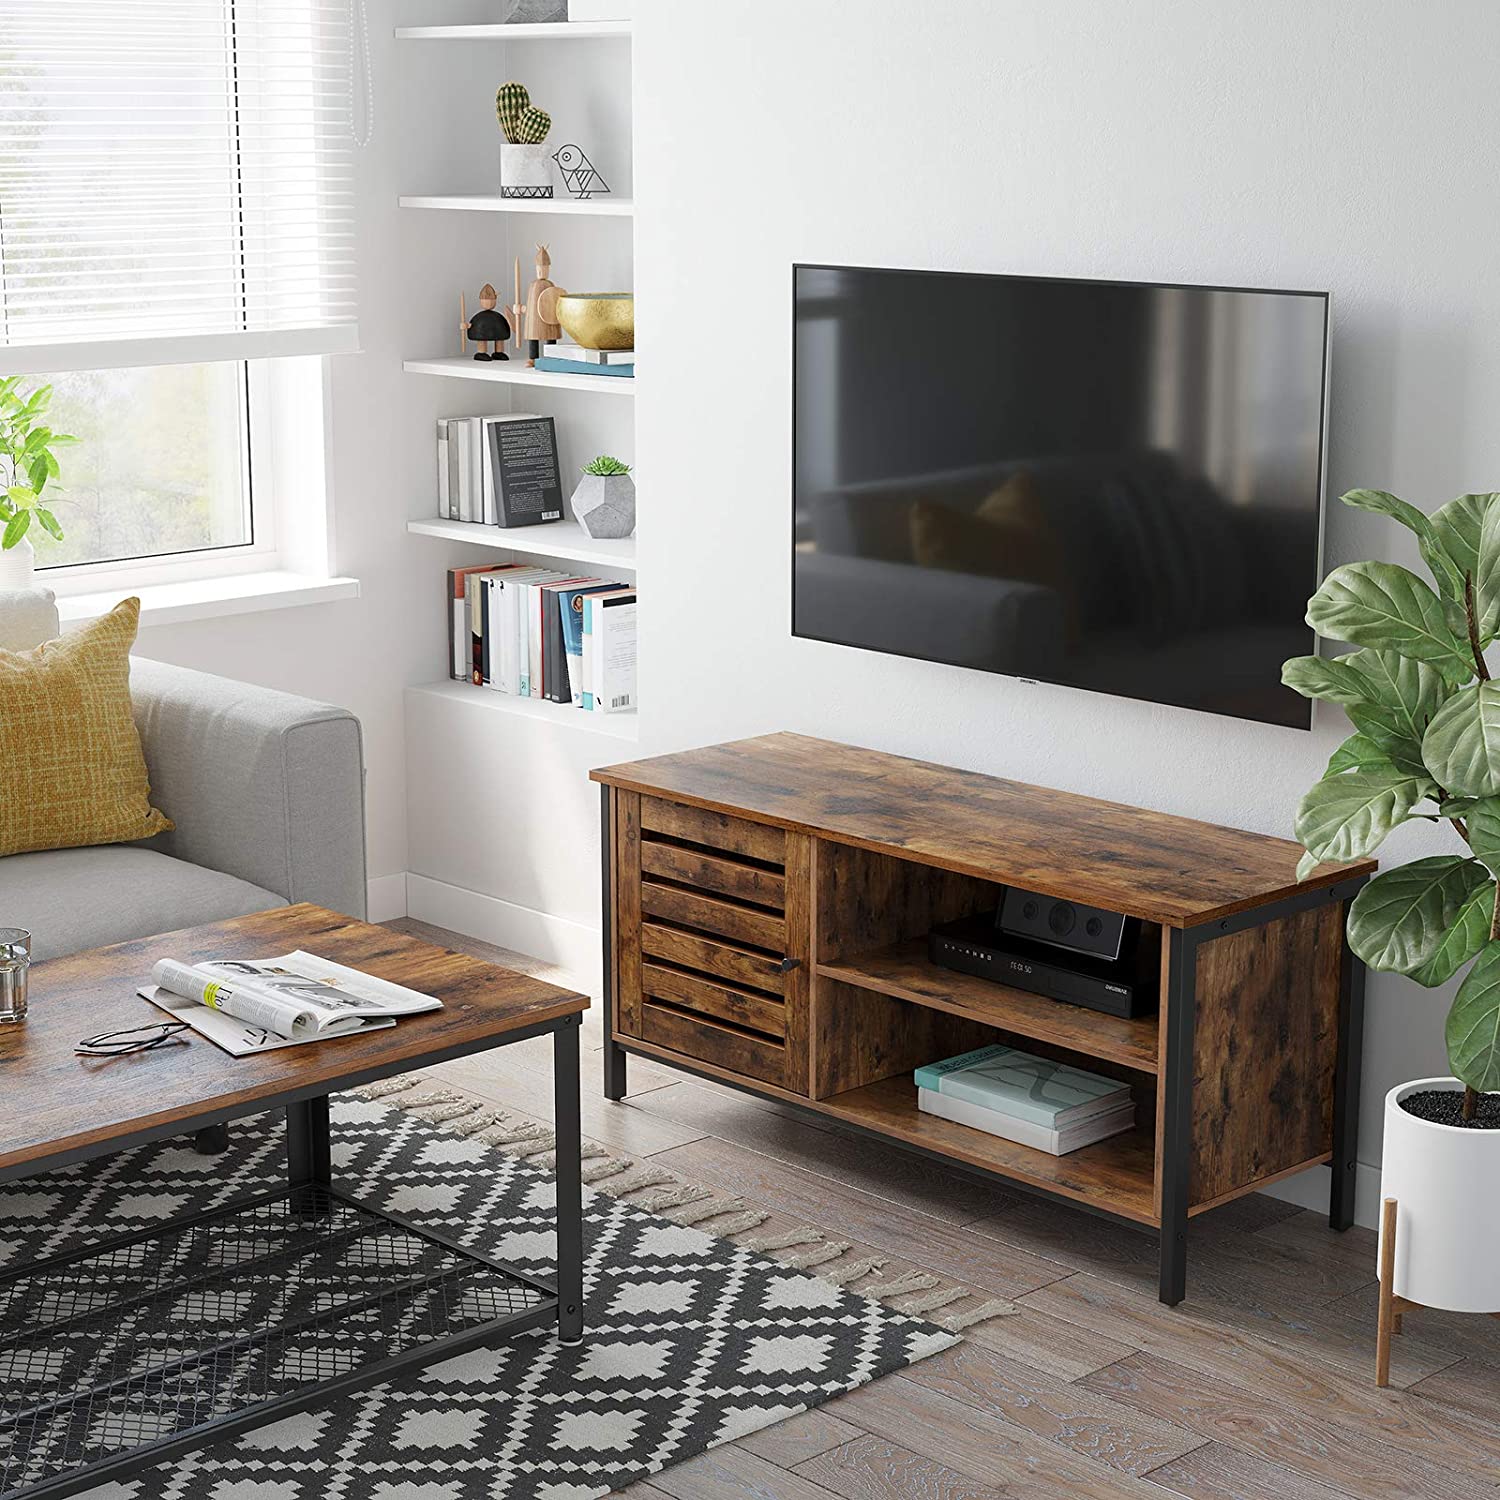 TV Cabinet for up to 127cm TVs with Louvred Door 2 Shelves for Living Room and Bedroom Rustic Brown and Black